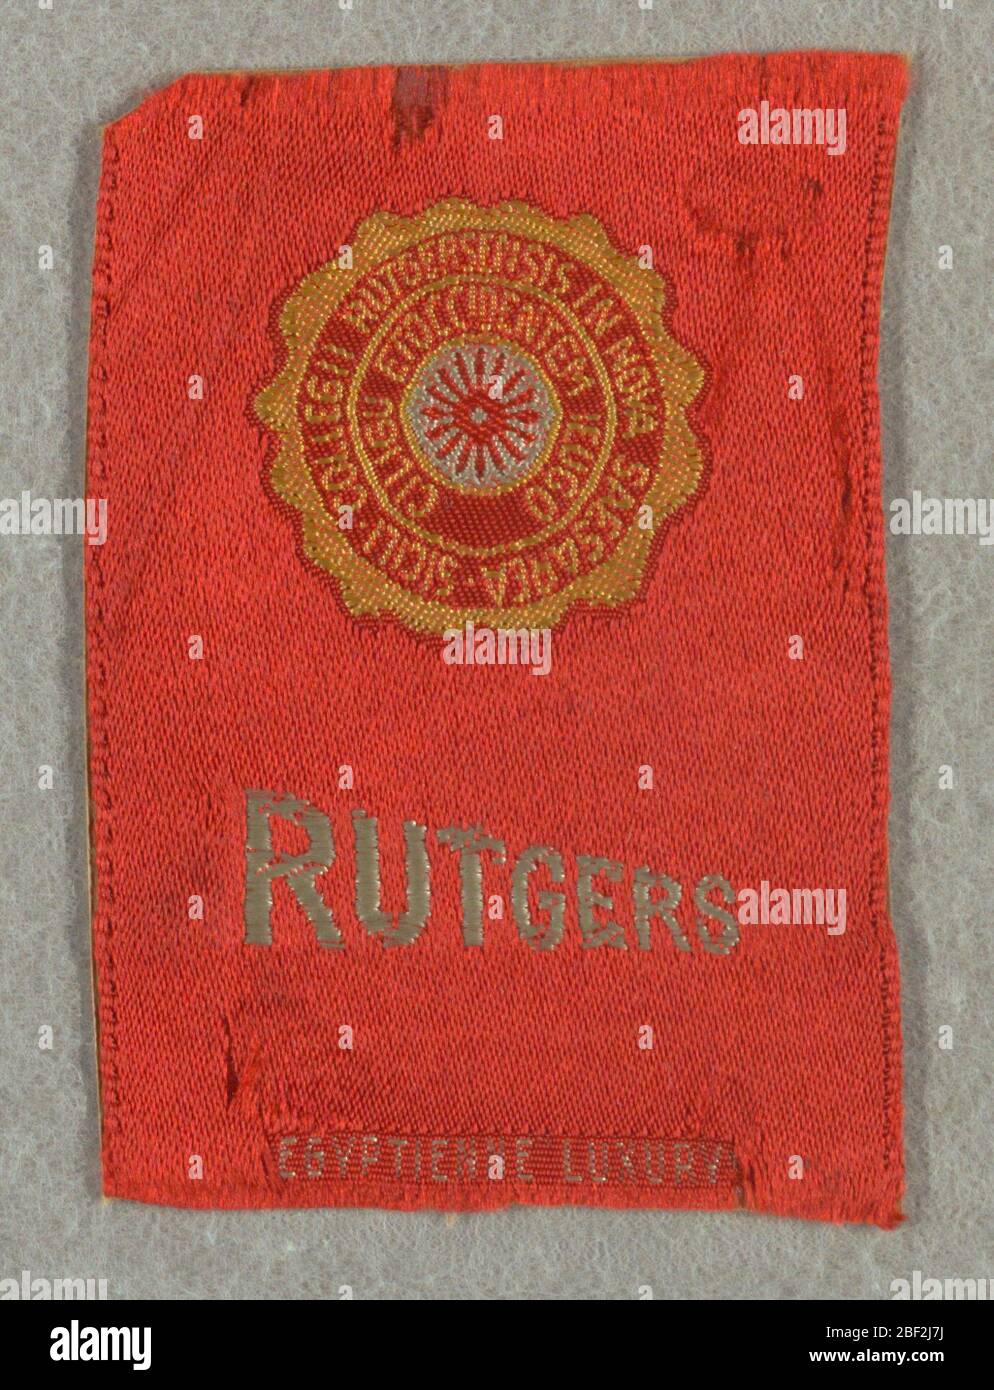 Souvenir. Red tobacco silk from Egyptienne Luxury cigarettes with seal of Rutgers University in yellow and white. Just below is 'Rutgers' in white sloping capital letters. Stock Photo